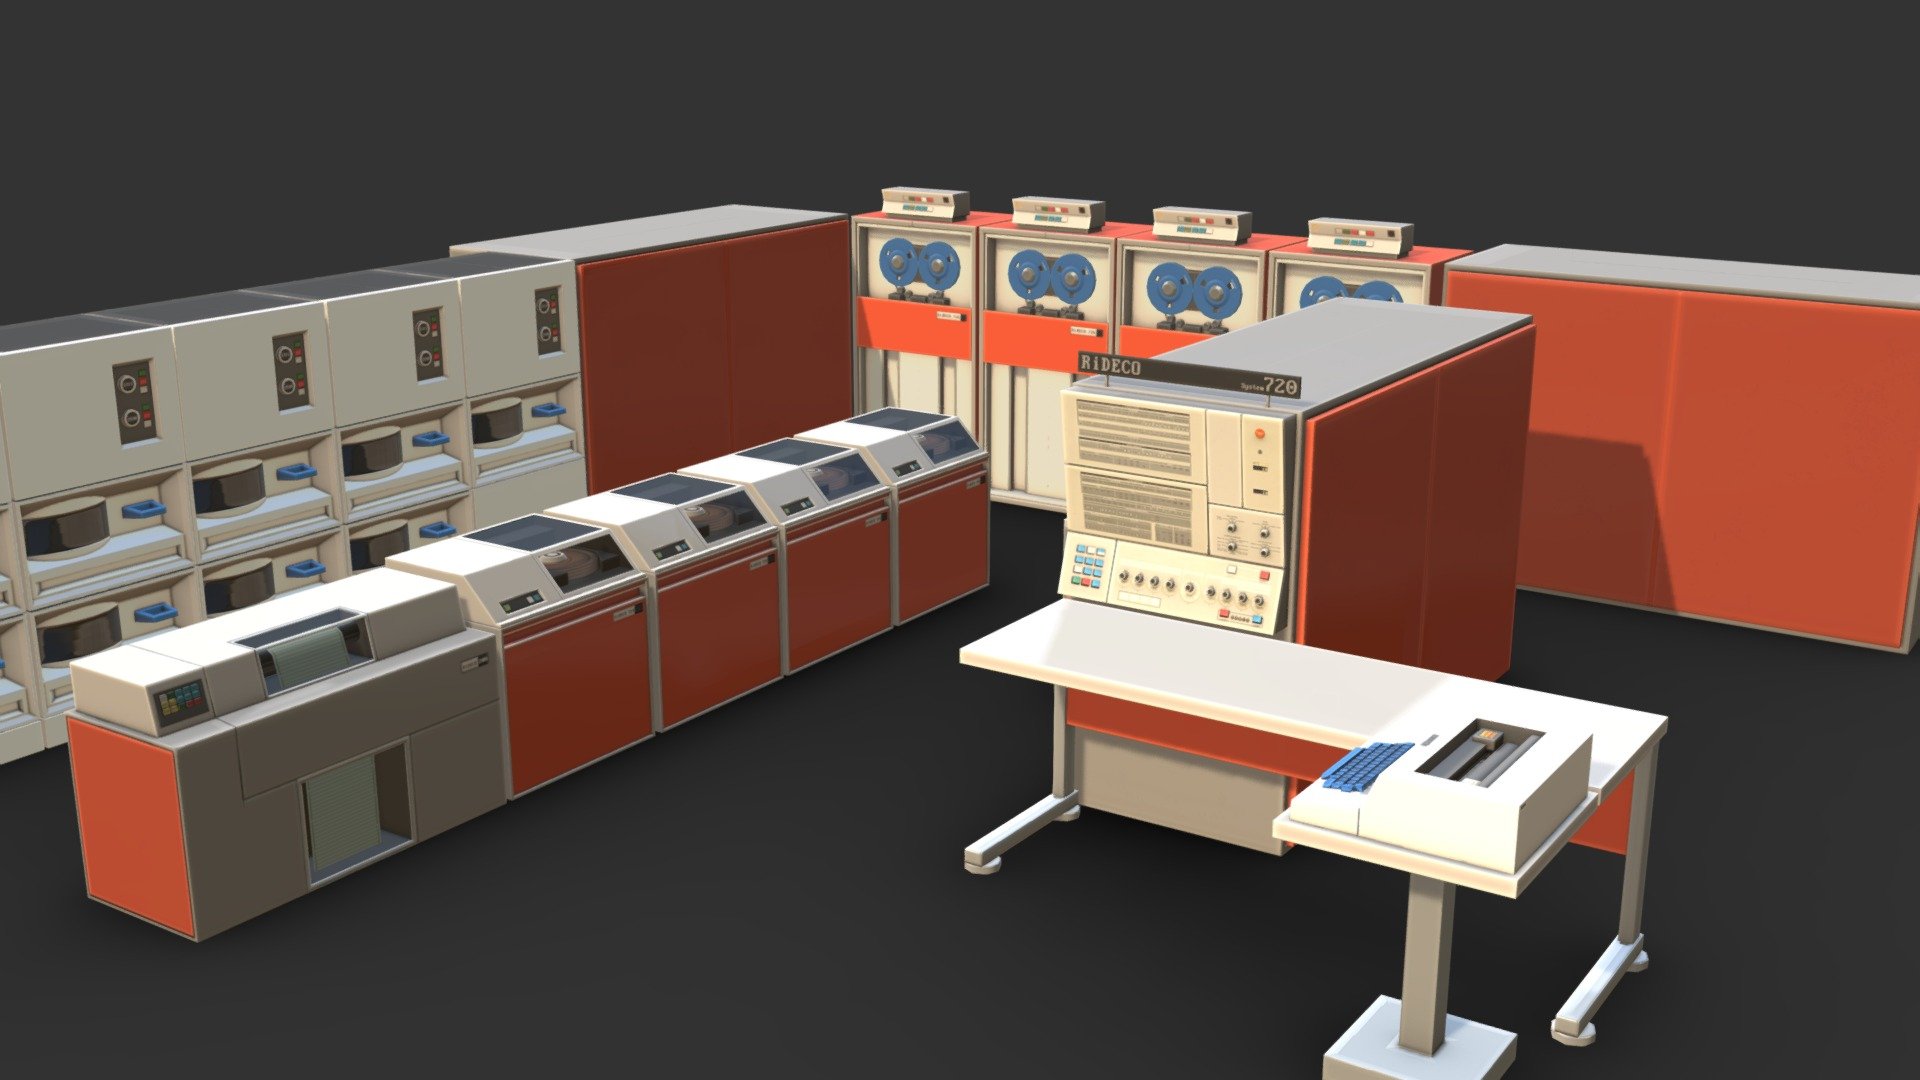 A 1960's era computer mainframe made for Second Life. It's loosely based on the IBM System 360.



If you use second life, you can buy it here: https://marketplace.secondlife.com/p/RiDECO-System-720-Mainframe-Kit/10935860

Made with 3DSMax and Substance Painter 3d model